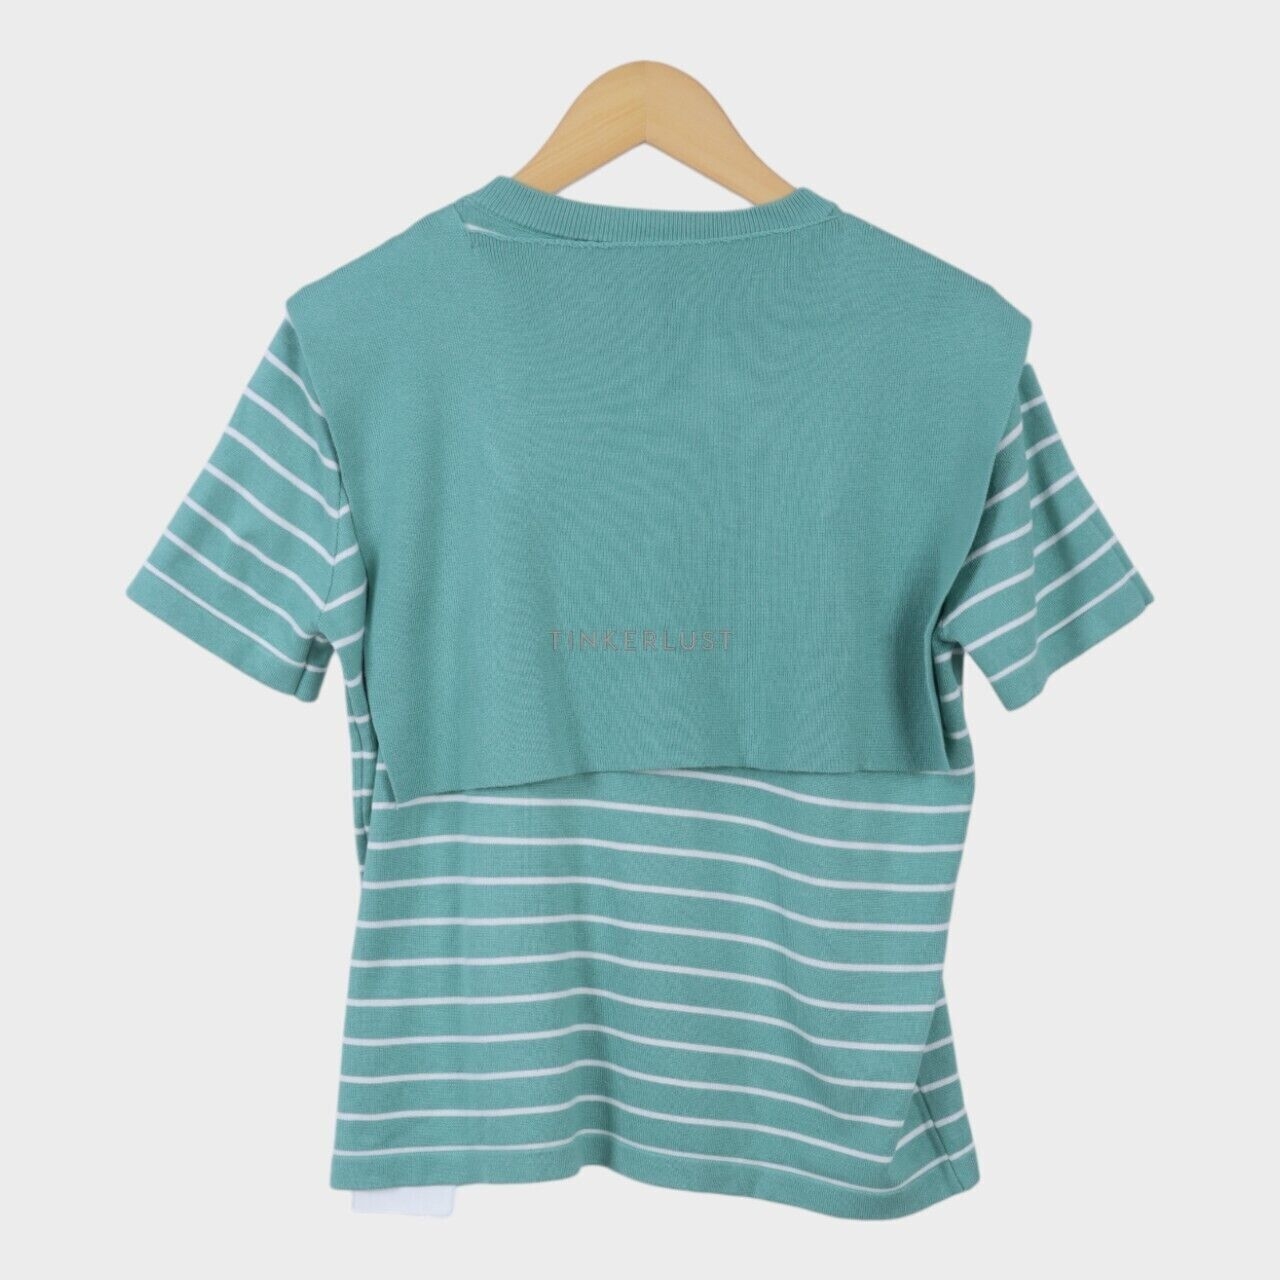 This is April Green & White Knit T-shirt